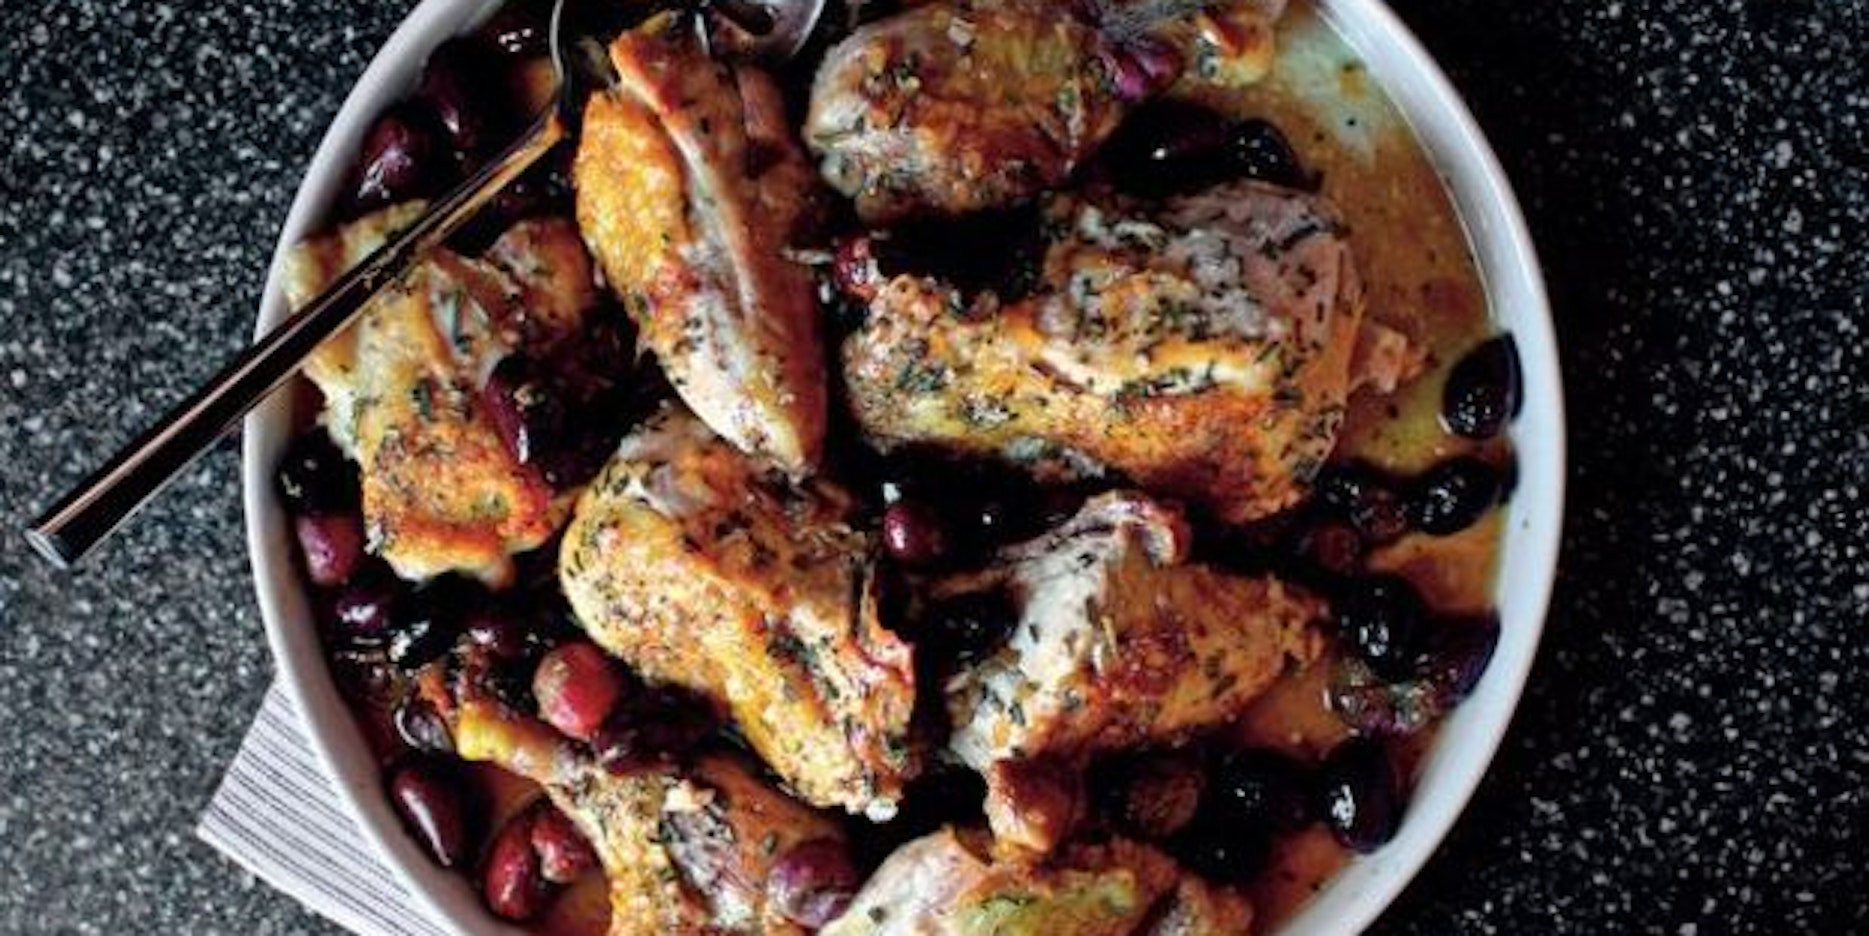 Deb Perelman 20121109-228682-cook-the-book-harvest-roast-chicken-with-olives-and-grapes-thumb-625xauto-283819